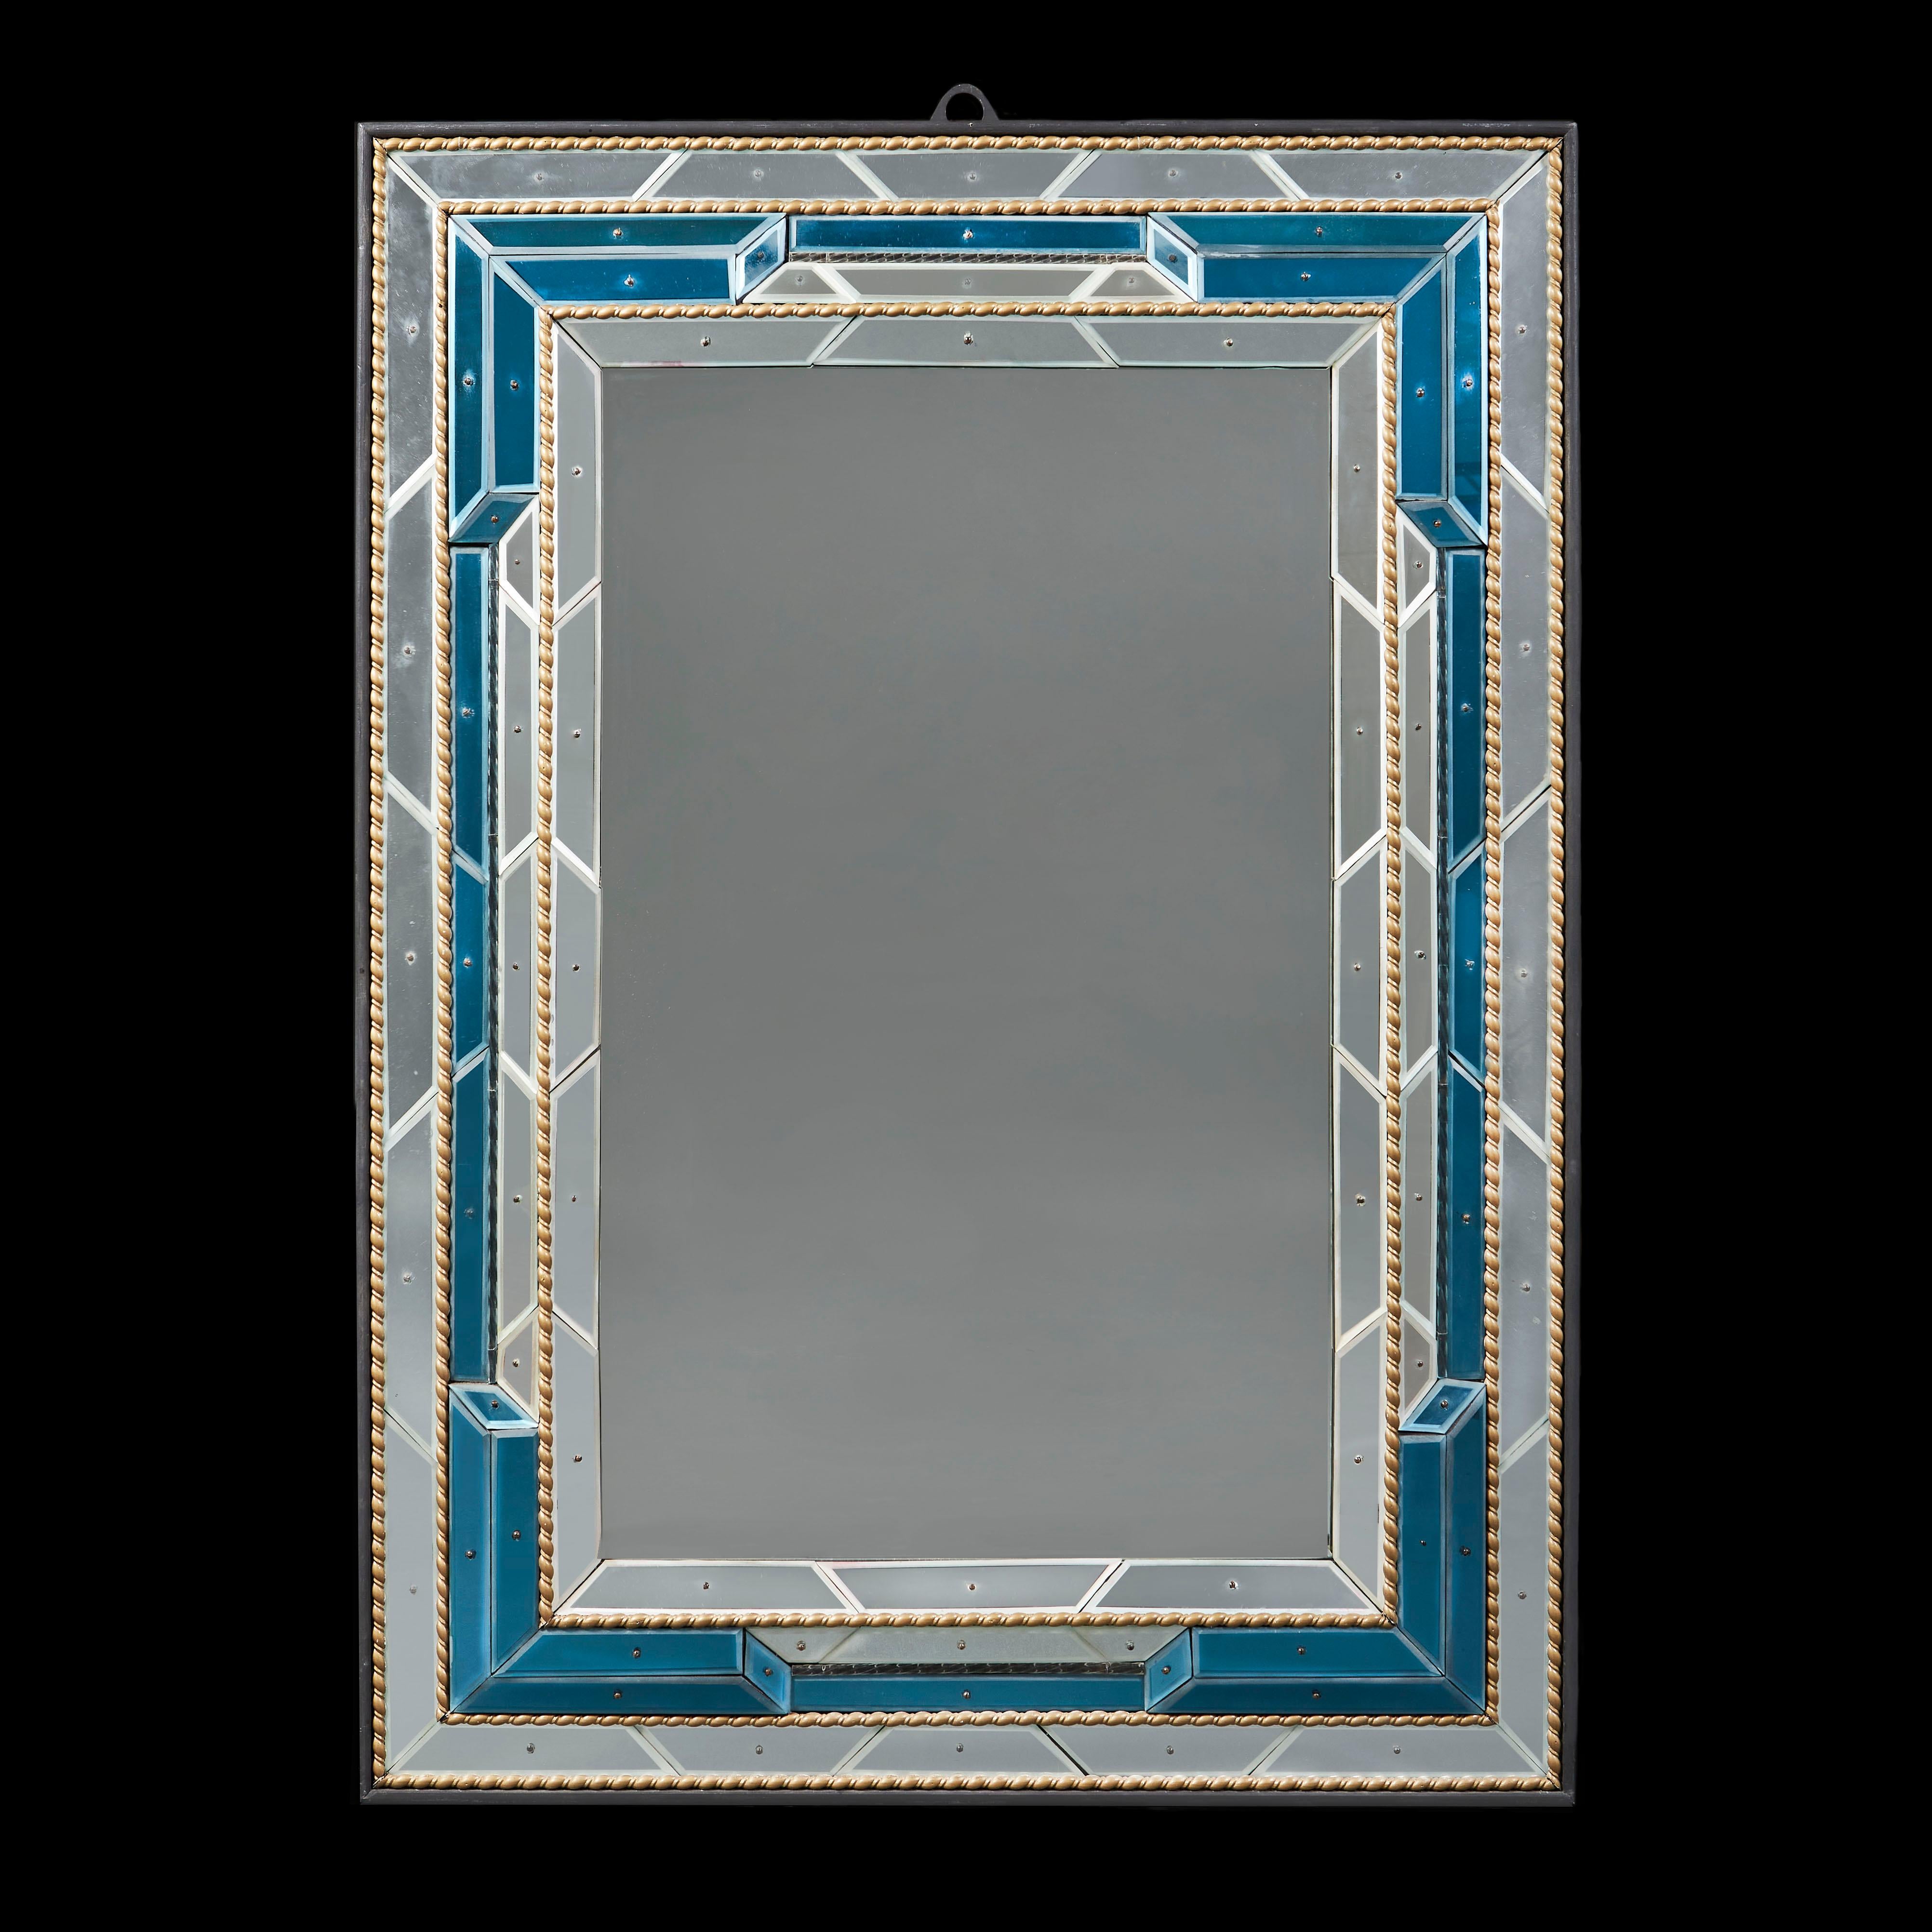 A fine matched pair of overscale mid-century Venetian mirrors with blue glass borders and segmented border frames, some variation in colour within the blue coloured glass panels, with ebonised frames and gilded beading, with aged mercury glass